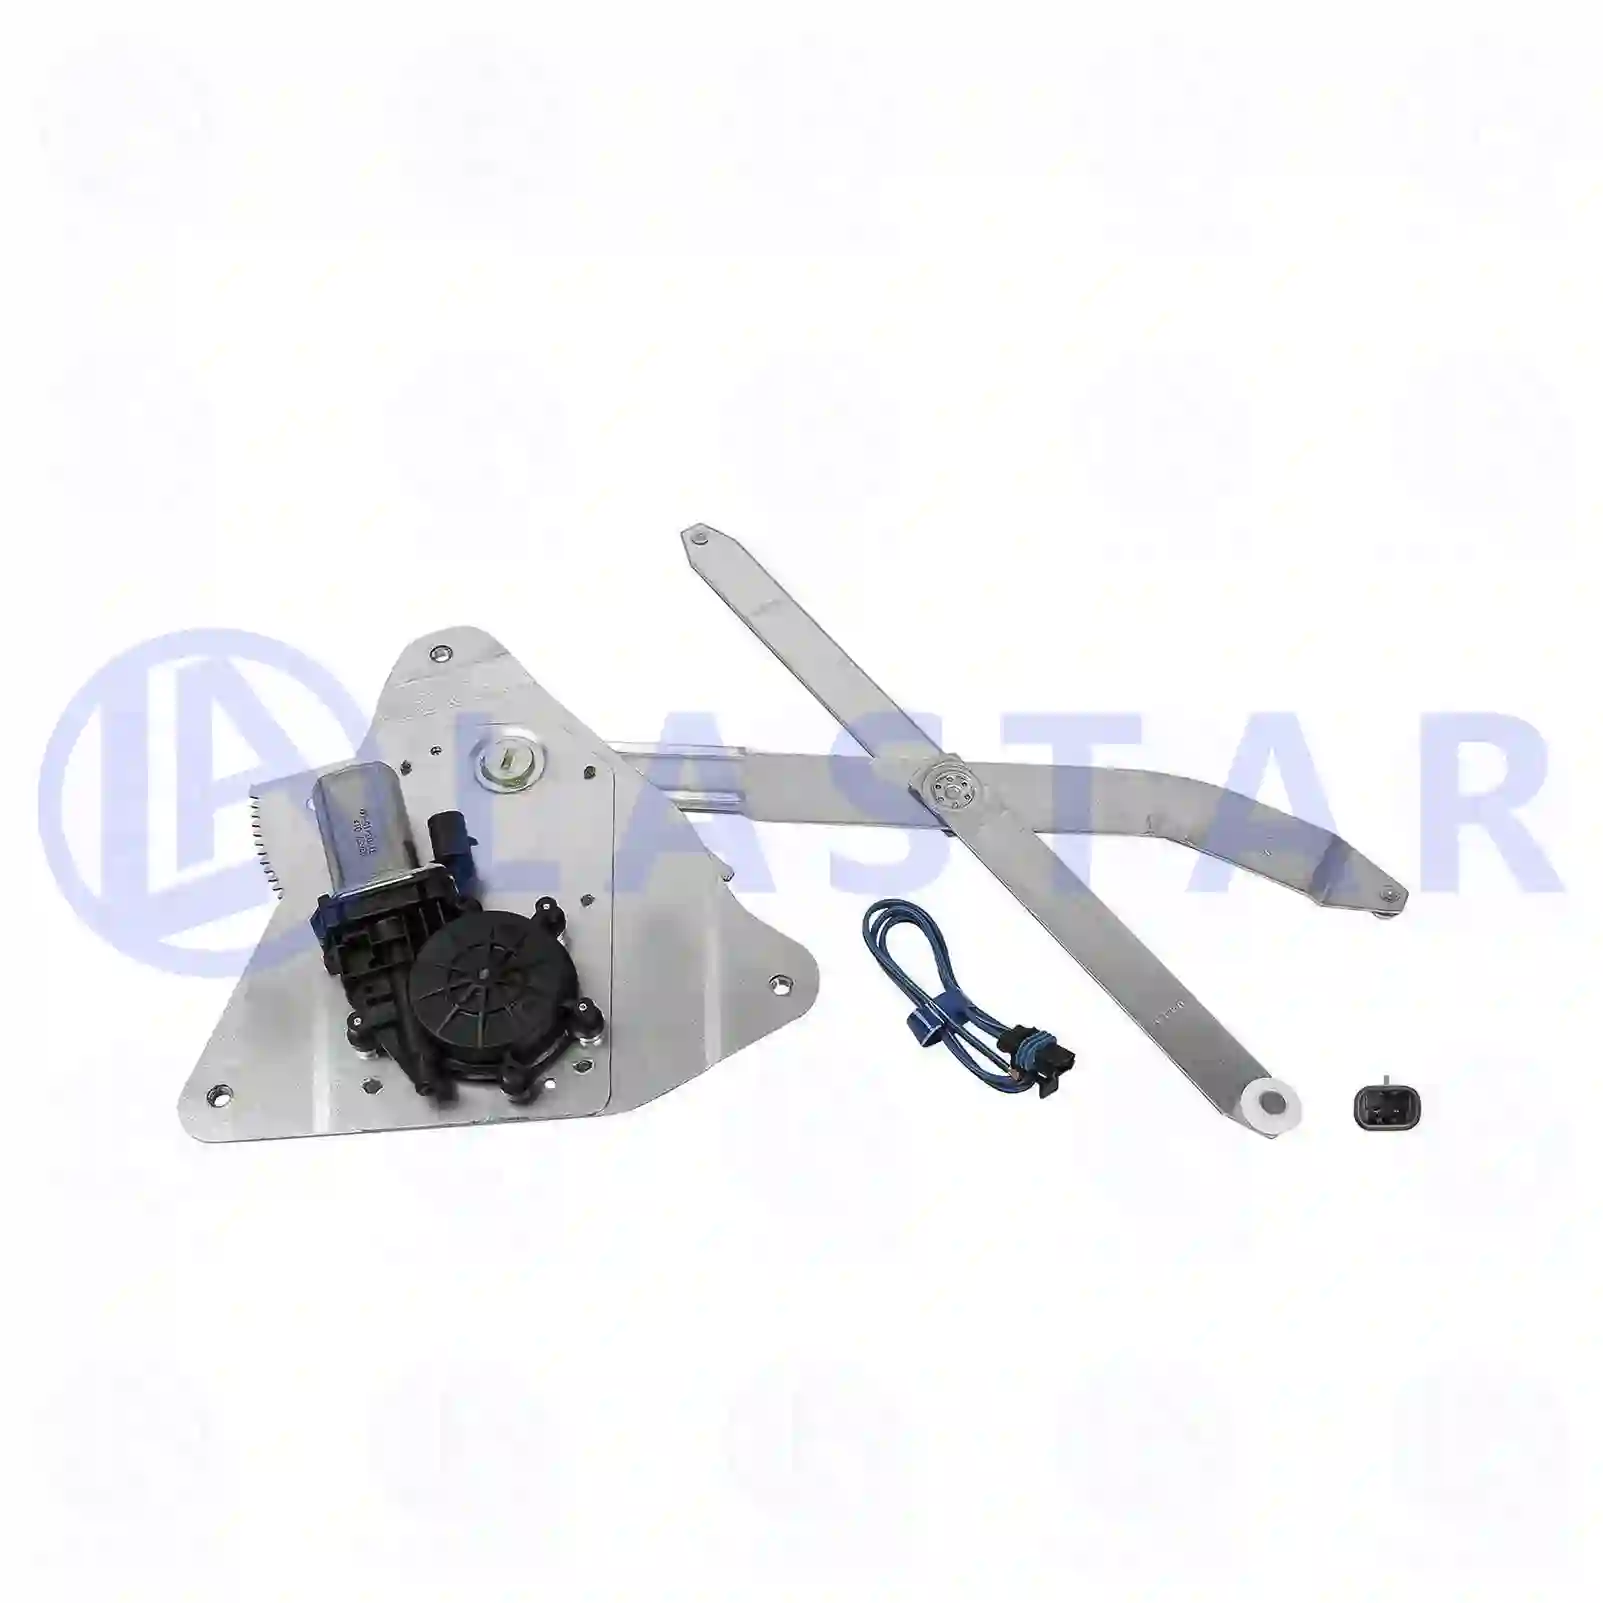 Window regulator, left, electrical, with motor, 77718112, 1406613, 1406615S, 376673, ZG61293-0008 ||  77718112 Lastar Spare Part | Truck Spare Parts, Auotomotive Spare Parts Window regulator, left, electrical, with motor, 77718112, 1406613, 1406615S, 376673, ZG61293-0008 ||  77718112 Lastar Spare Part | Truck Spare Parts, Auotomotive Spare Parts